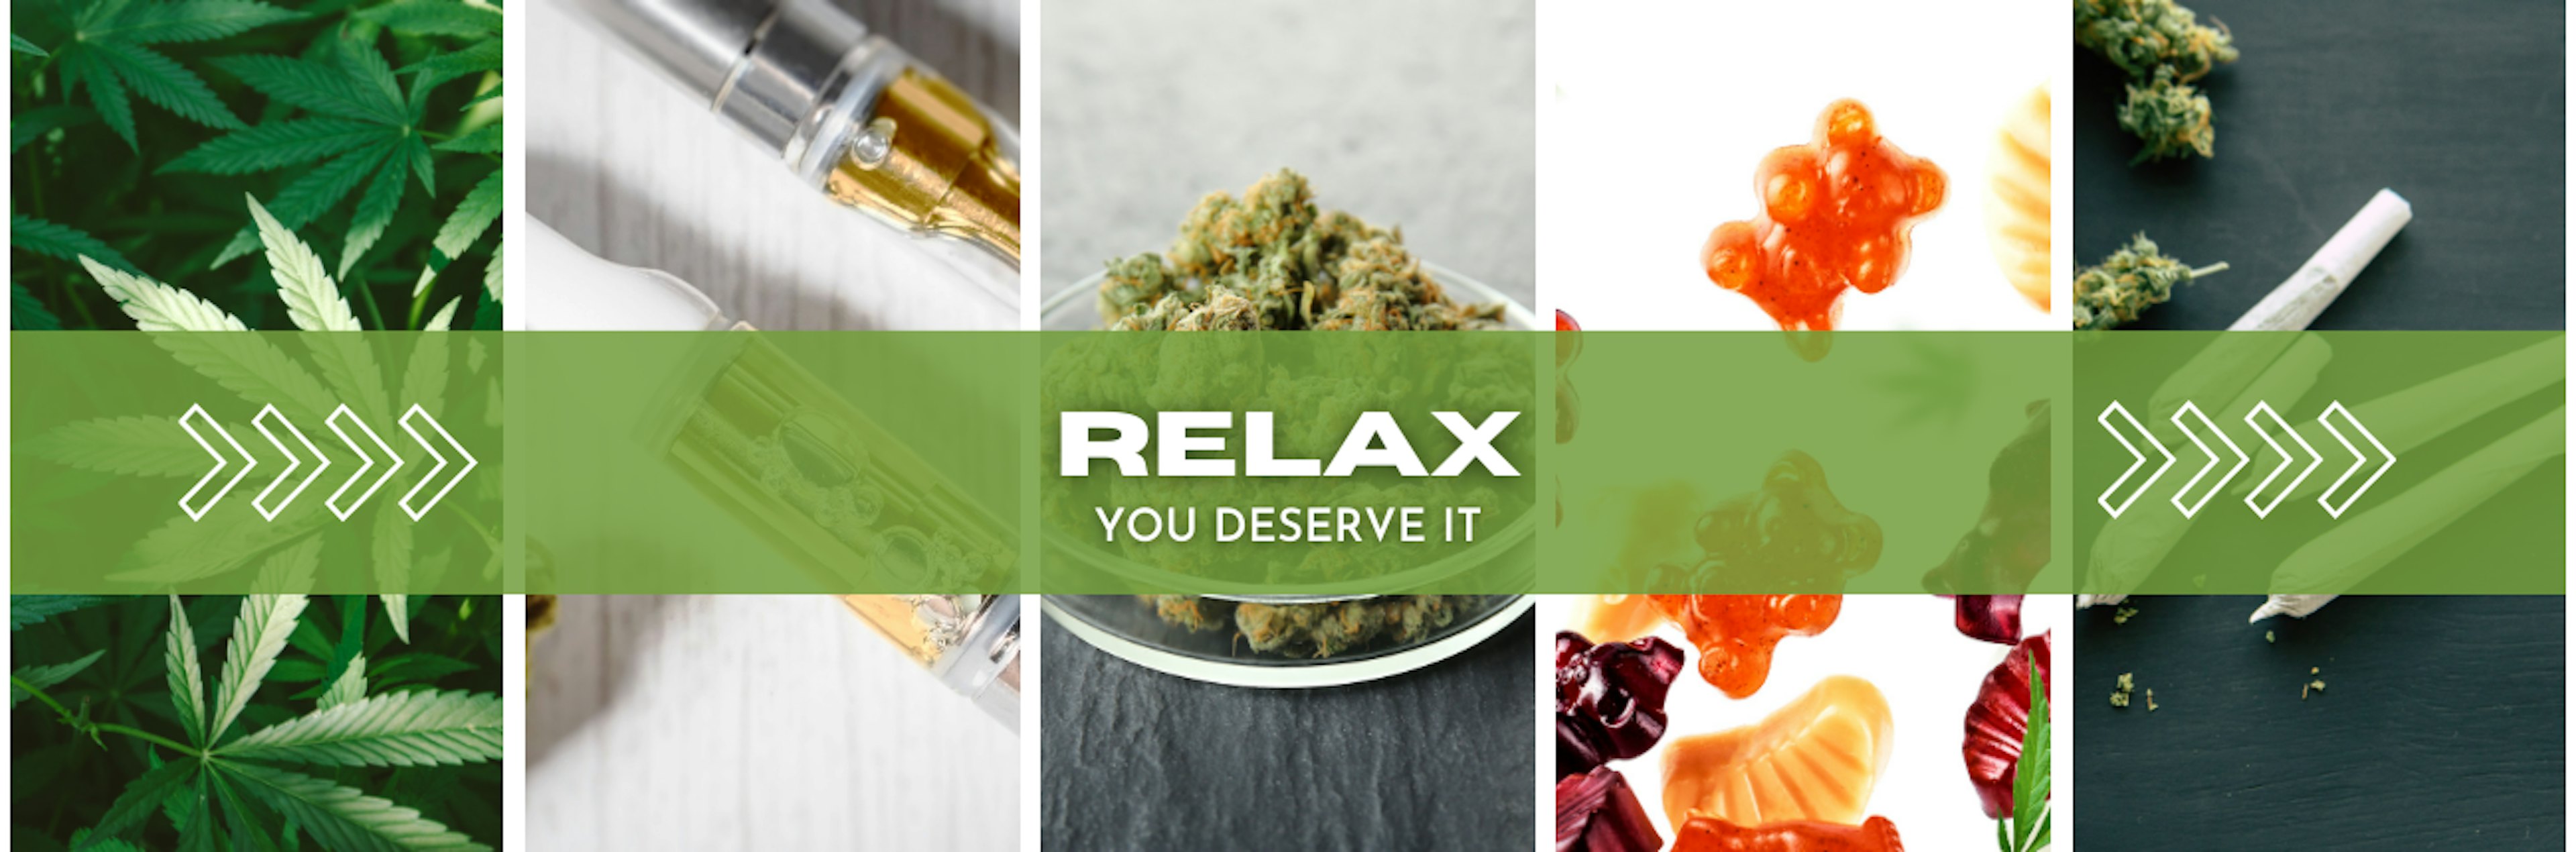 Relax - you deserve it